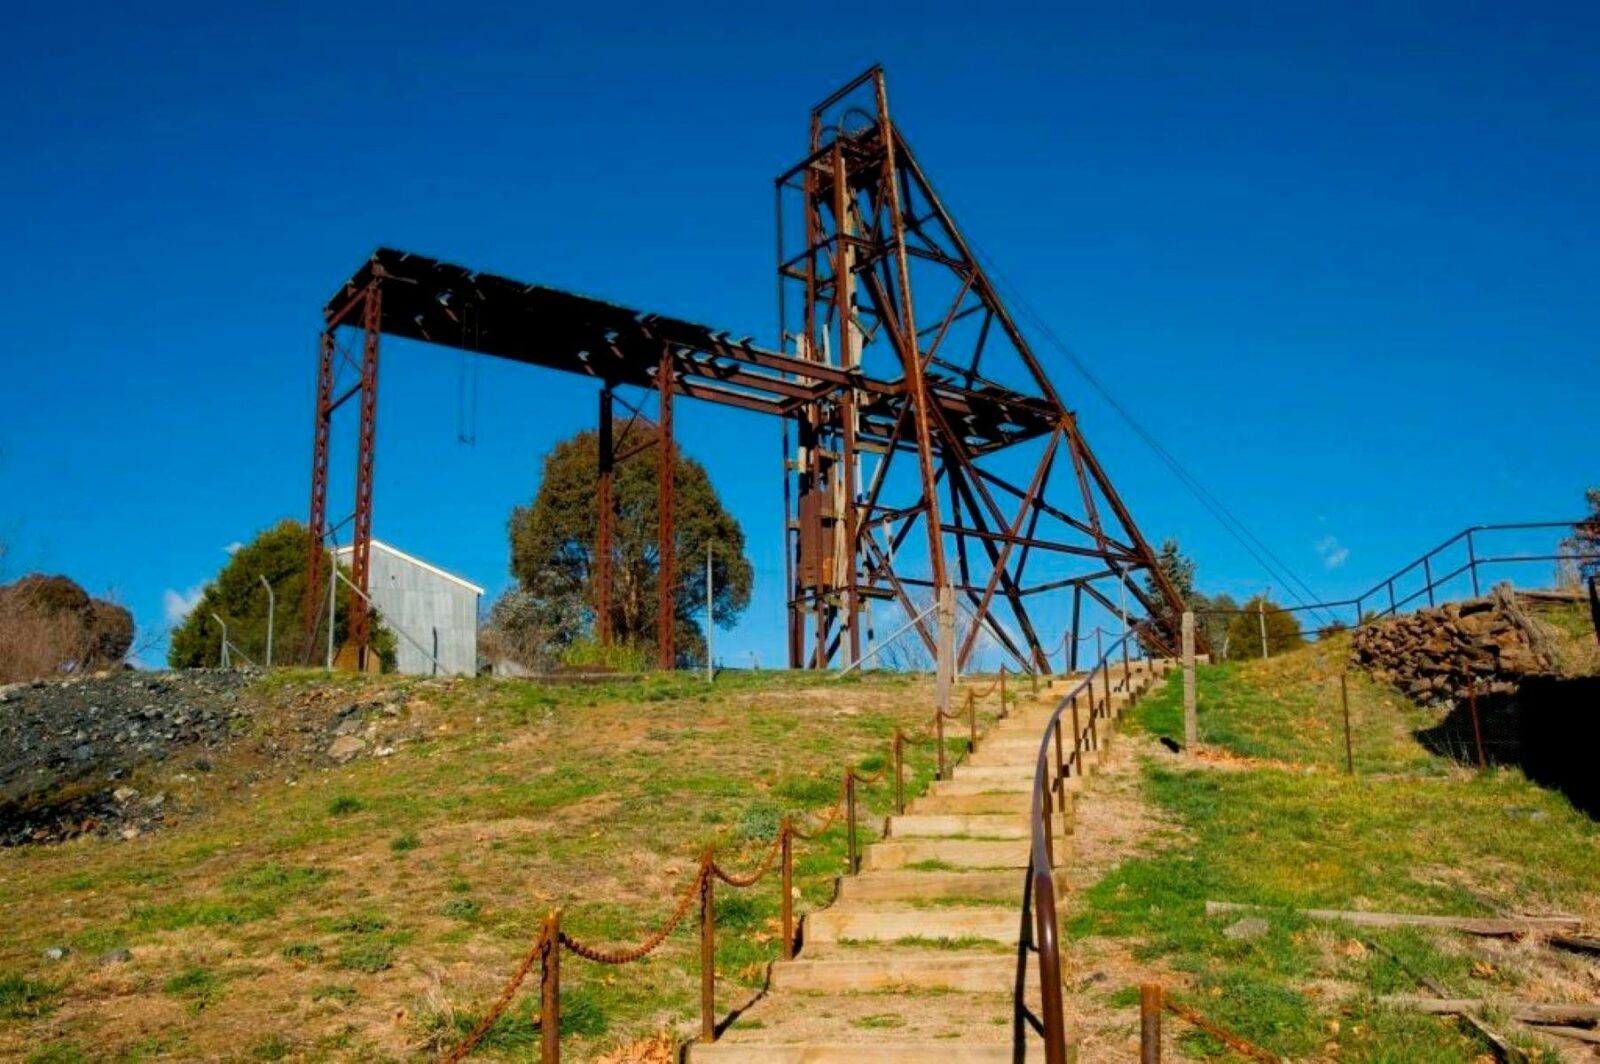 Steps leading up to metal structure above mineshaft